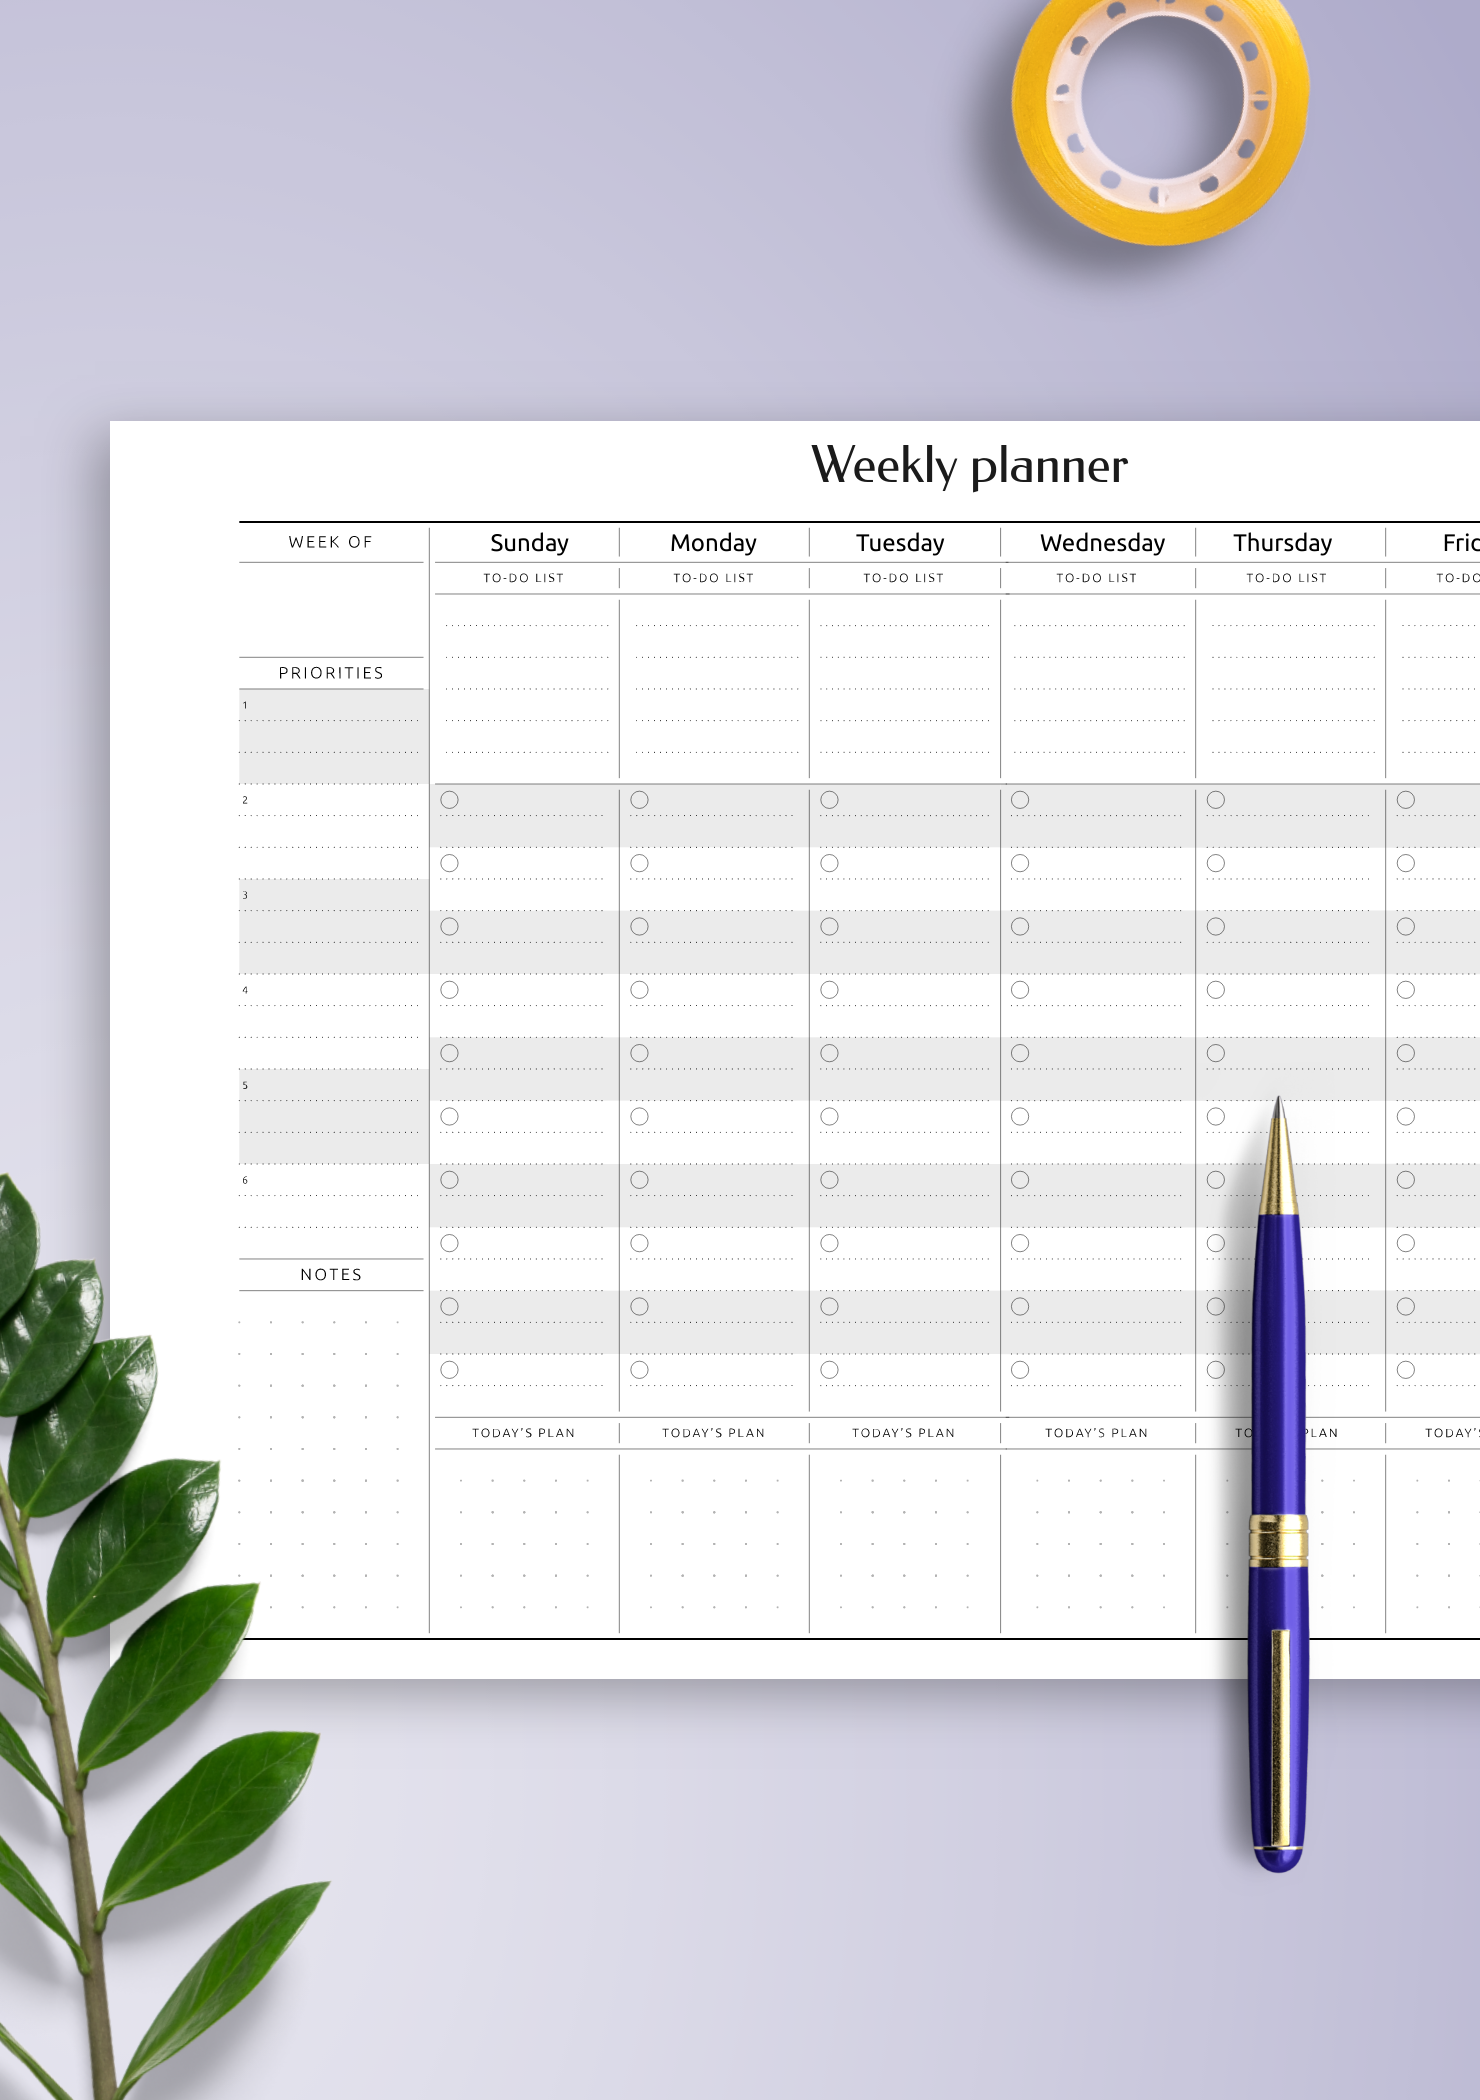 tasks by planner and to do